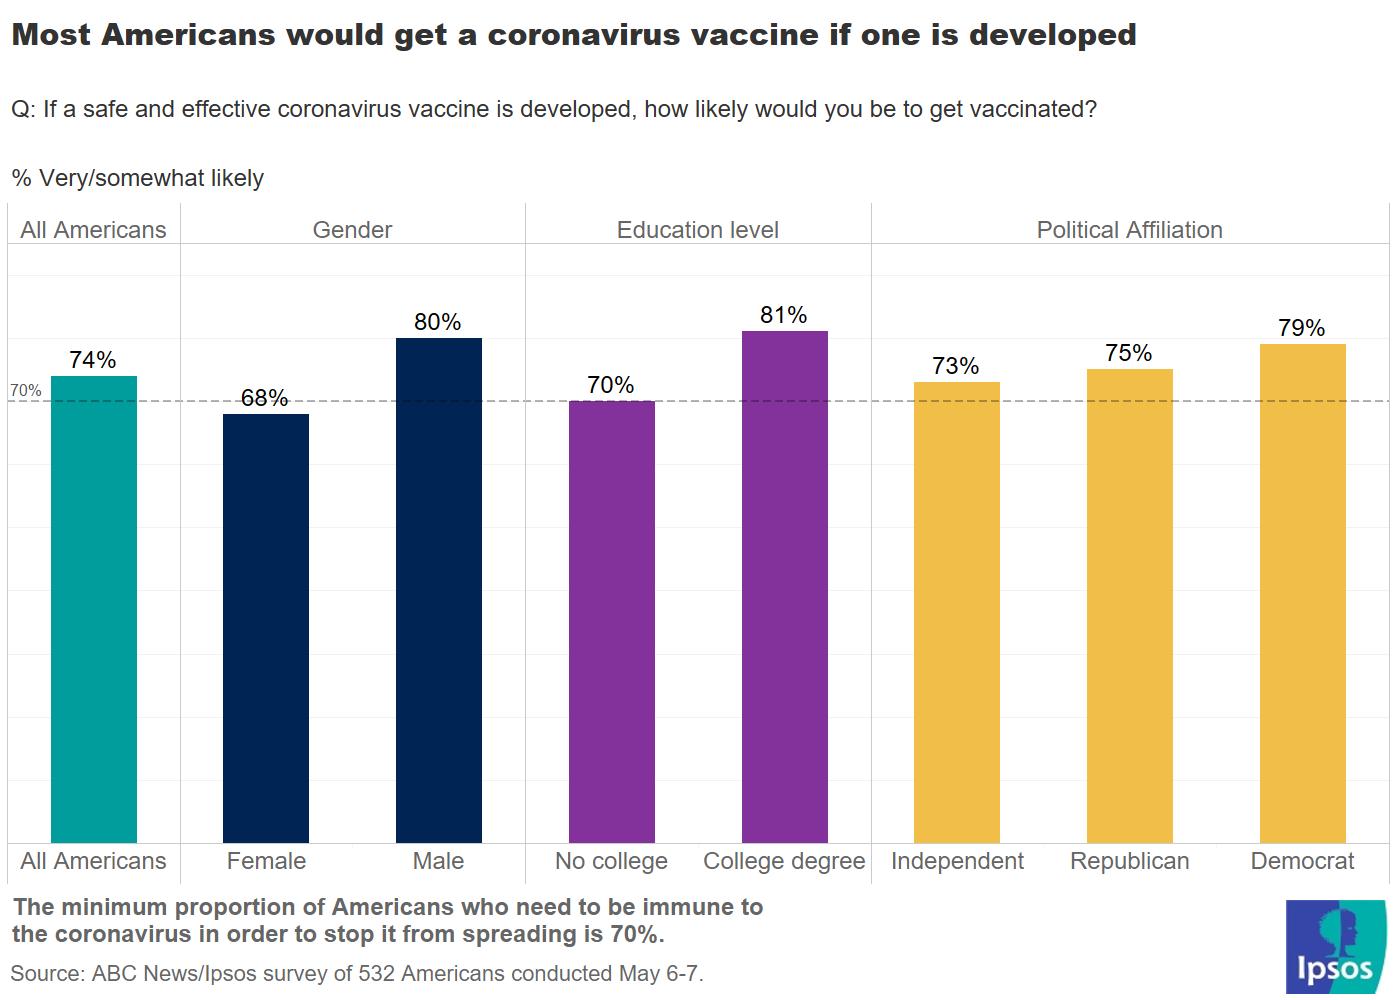 Americans most likely to get a vaccine